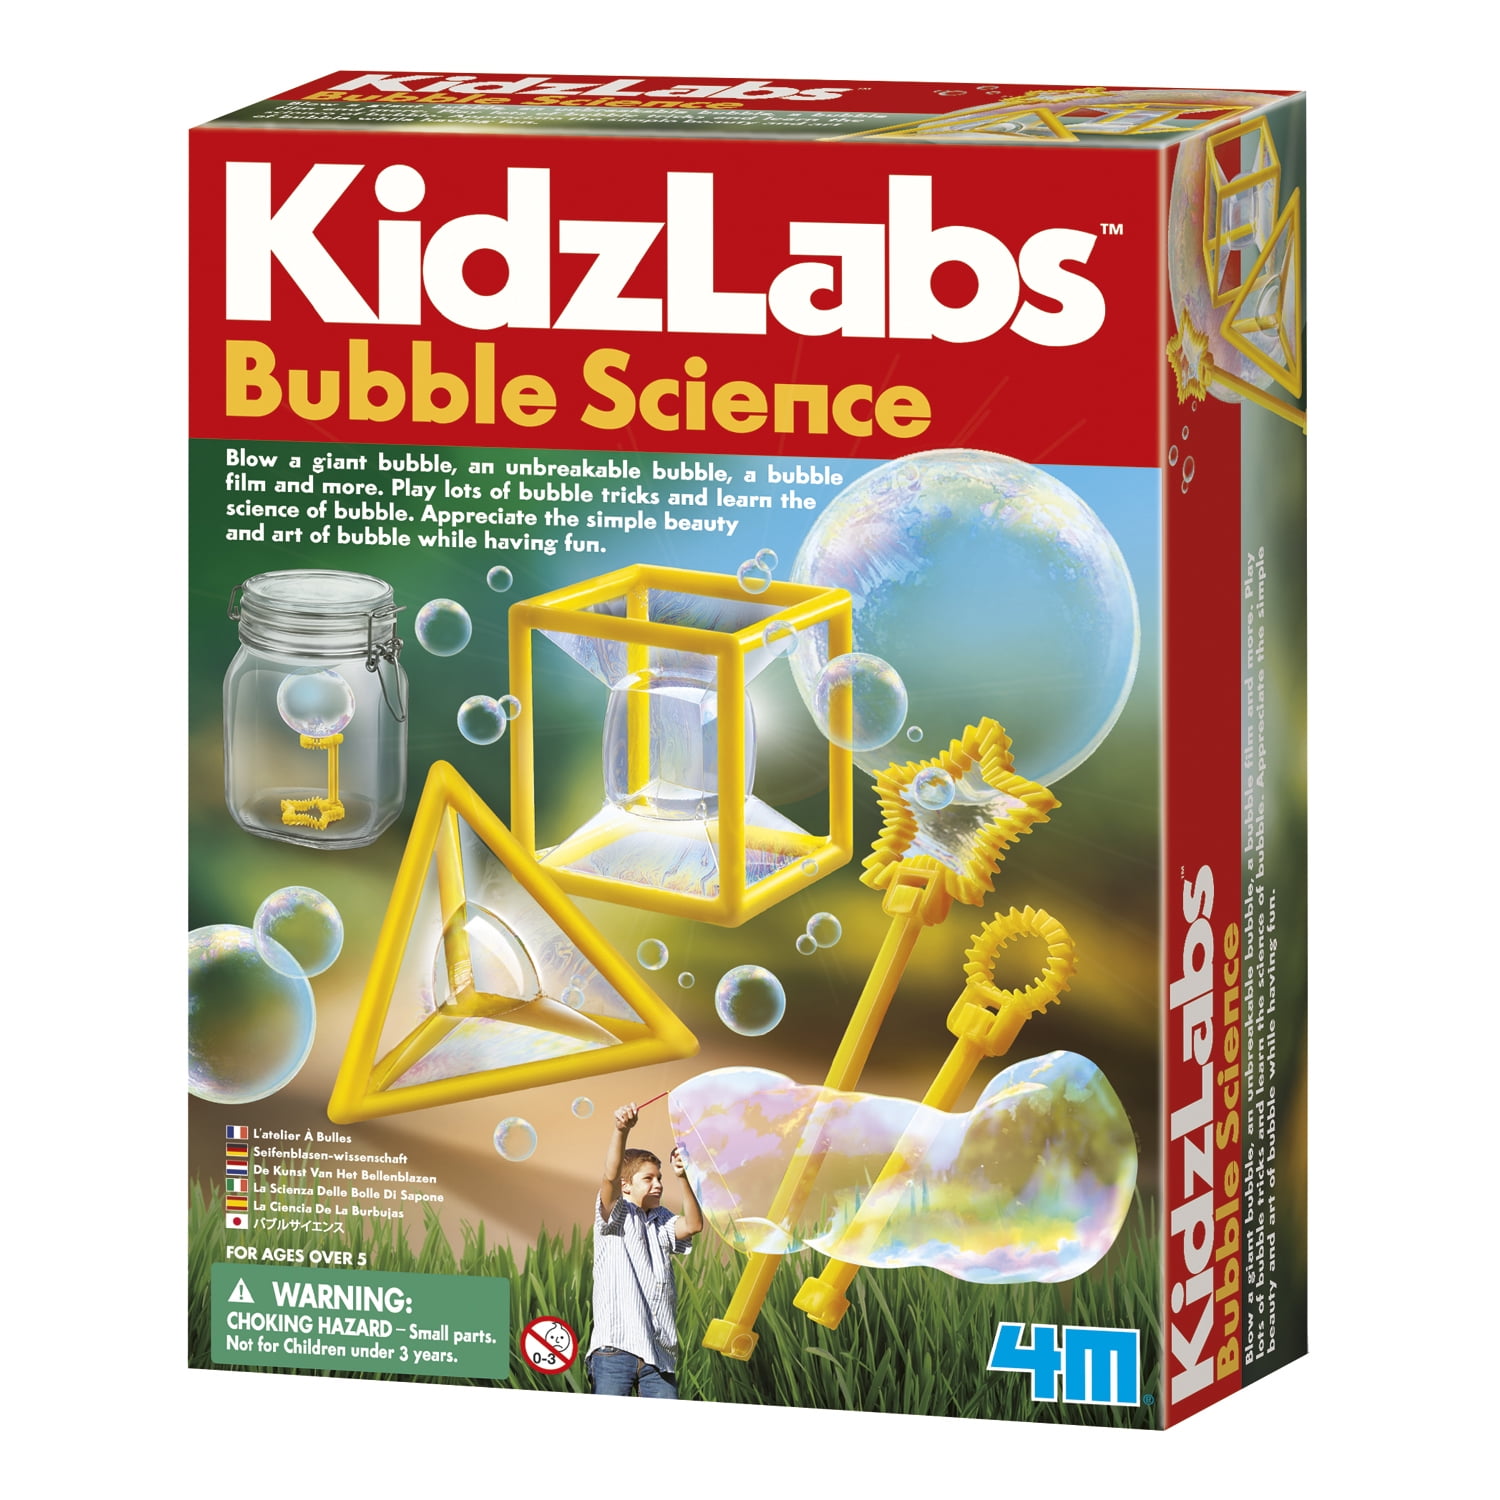 Kidz Labs MAGNETIC SCIENCE MODEL KIT EXPERIMENT Educational Science Toy 4M NEW 